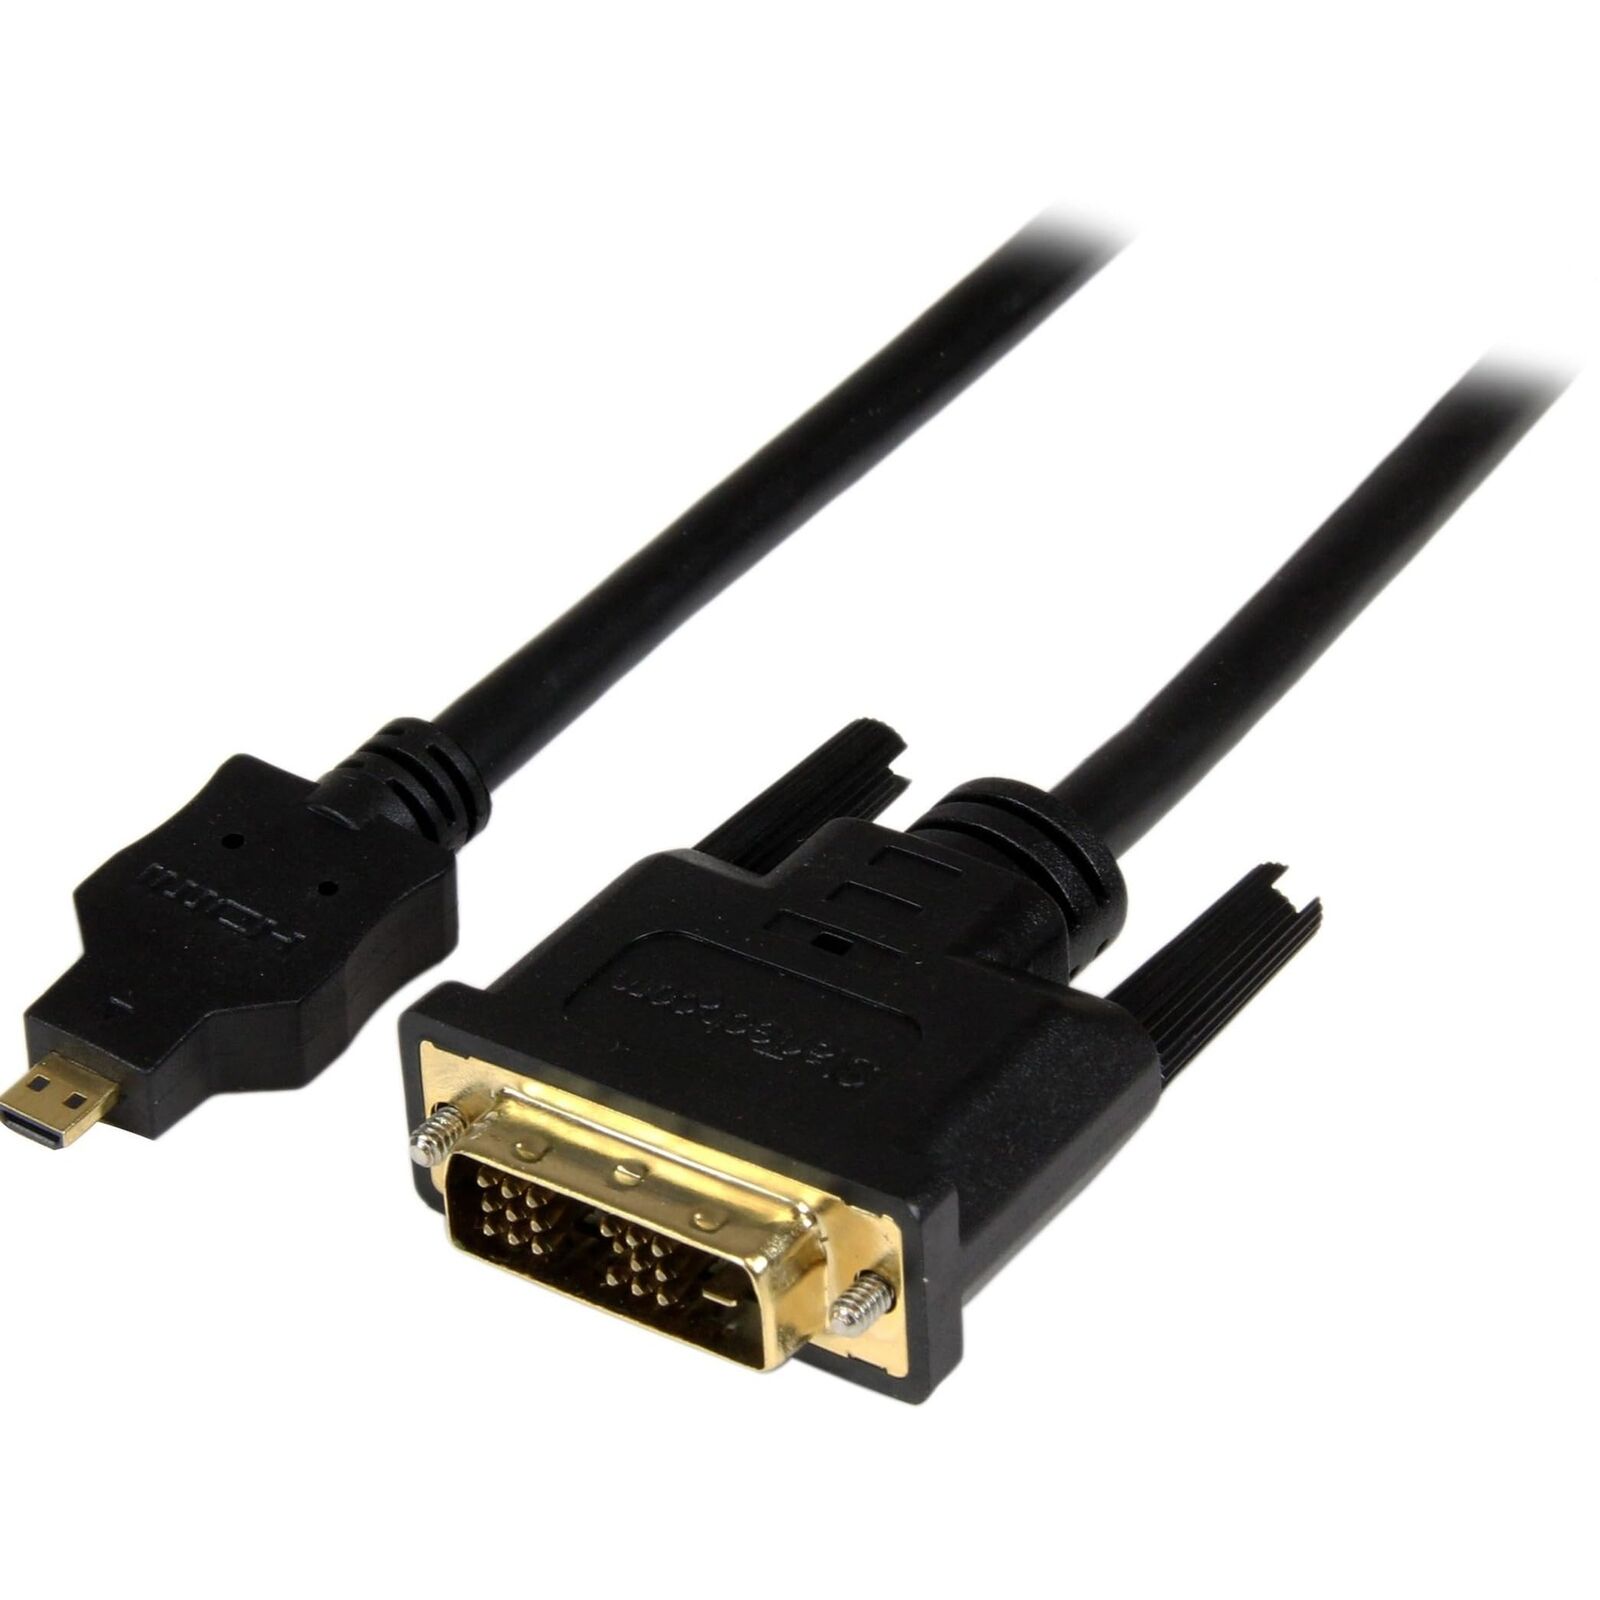 StarTech.com 3ft (1m) Micro HDMI to DVI Cable - Micro HDMI to DVI Adapter Cable 